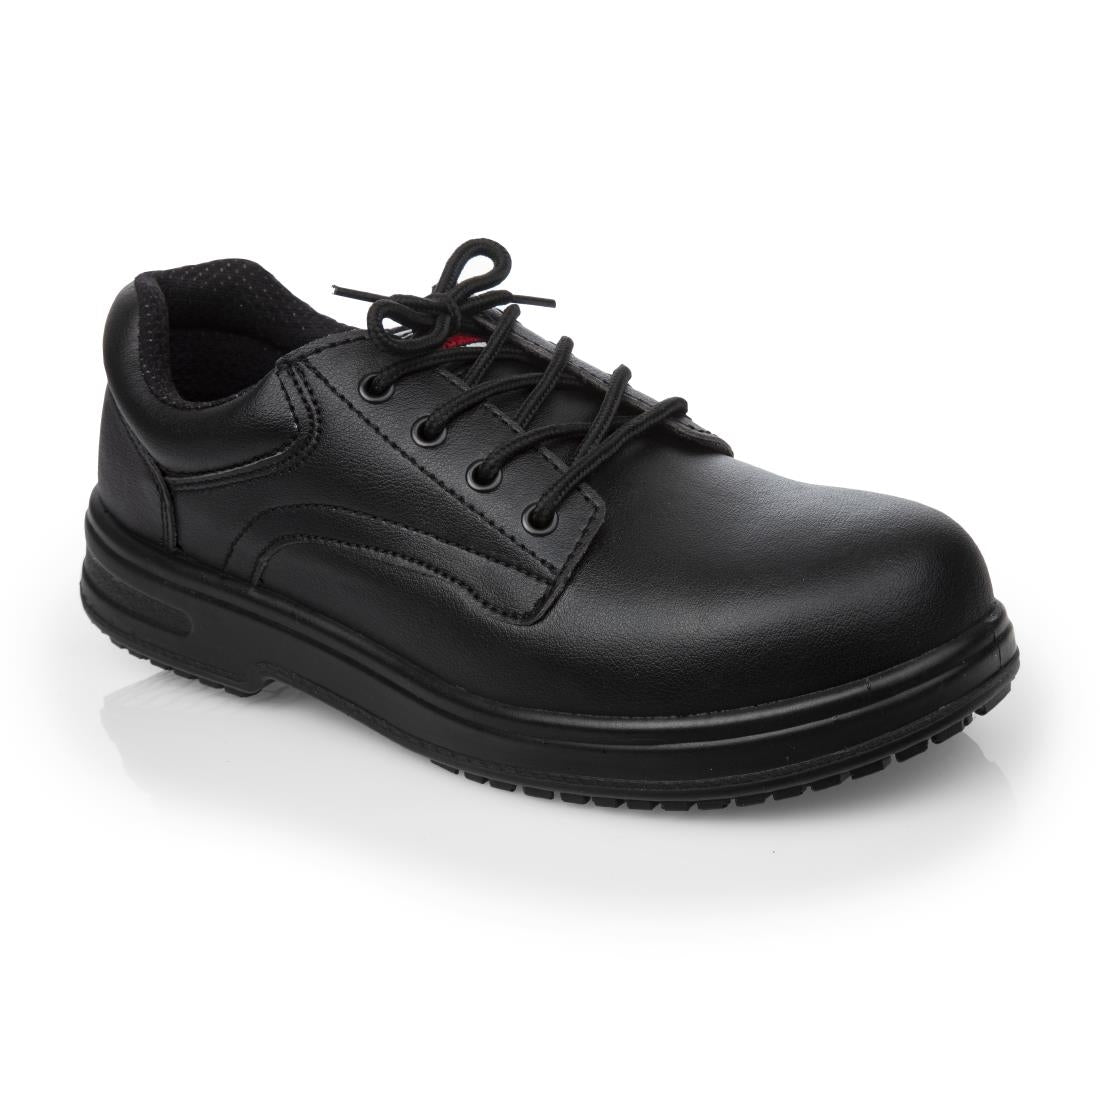 BB497-37 Slipbuster Basic Toe Cap Safety Shoes Black 37 JD Catering Equipment Solutions Ltd